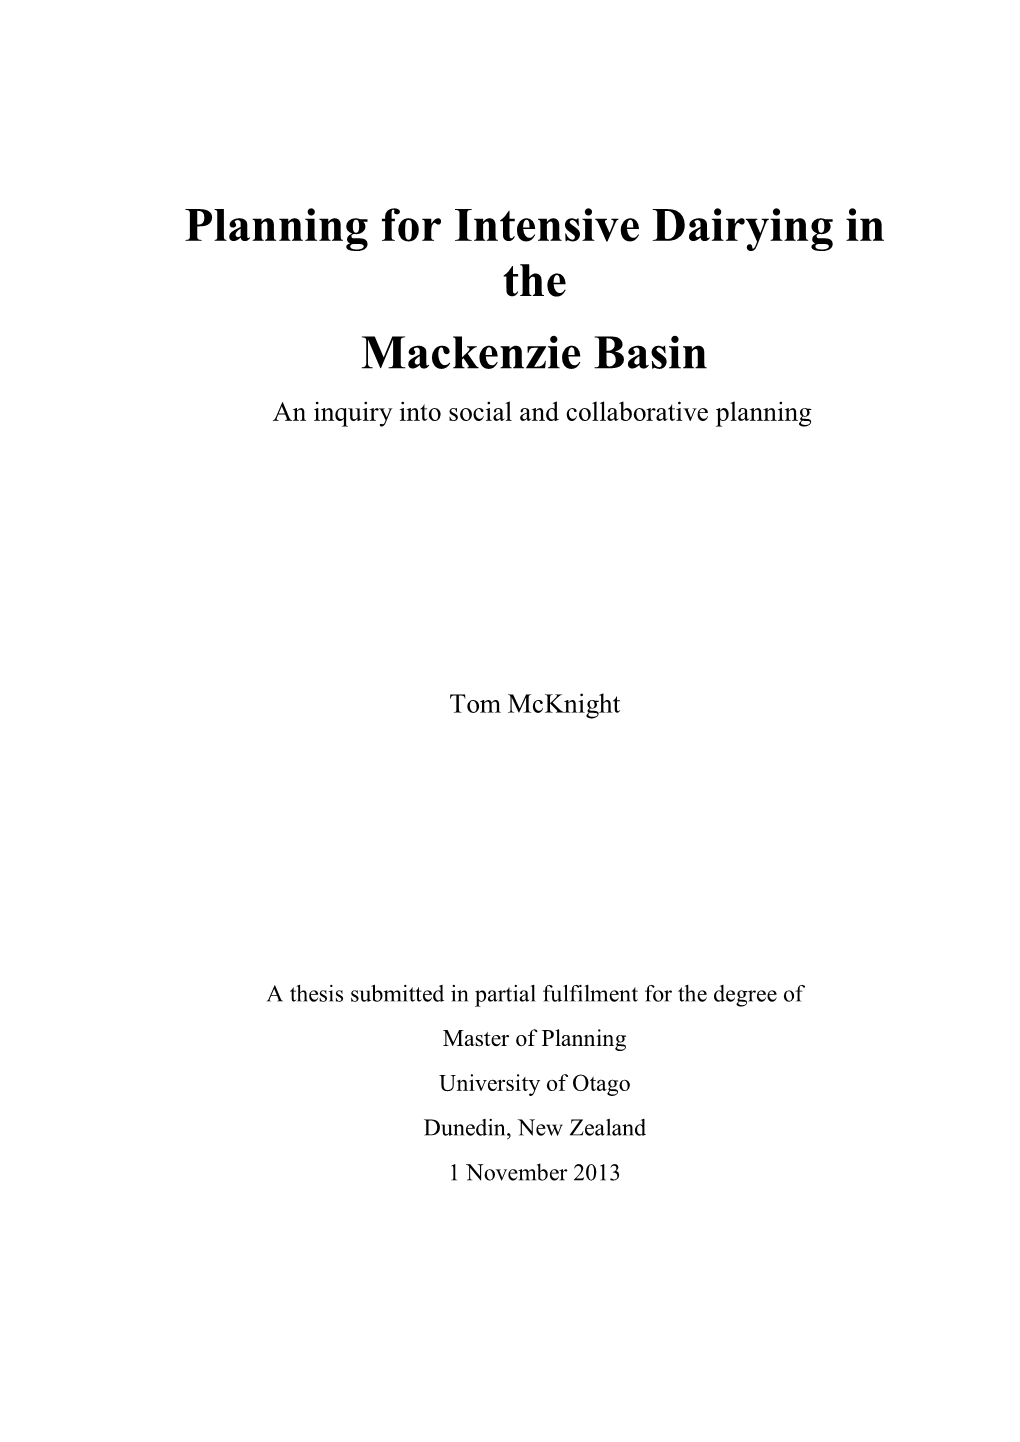 Planning for Intensive Dairying in the Mackenzie Basin an Inquiry Into Social and Collaborative Planning